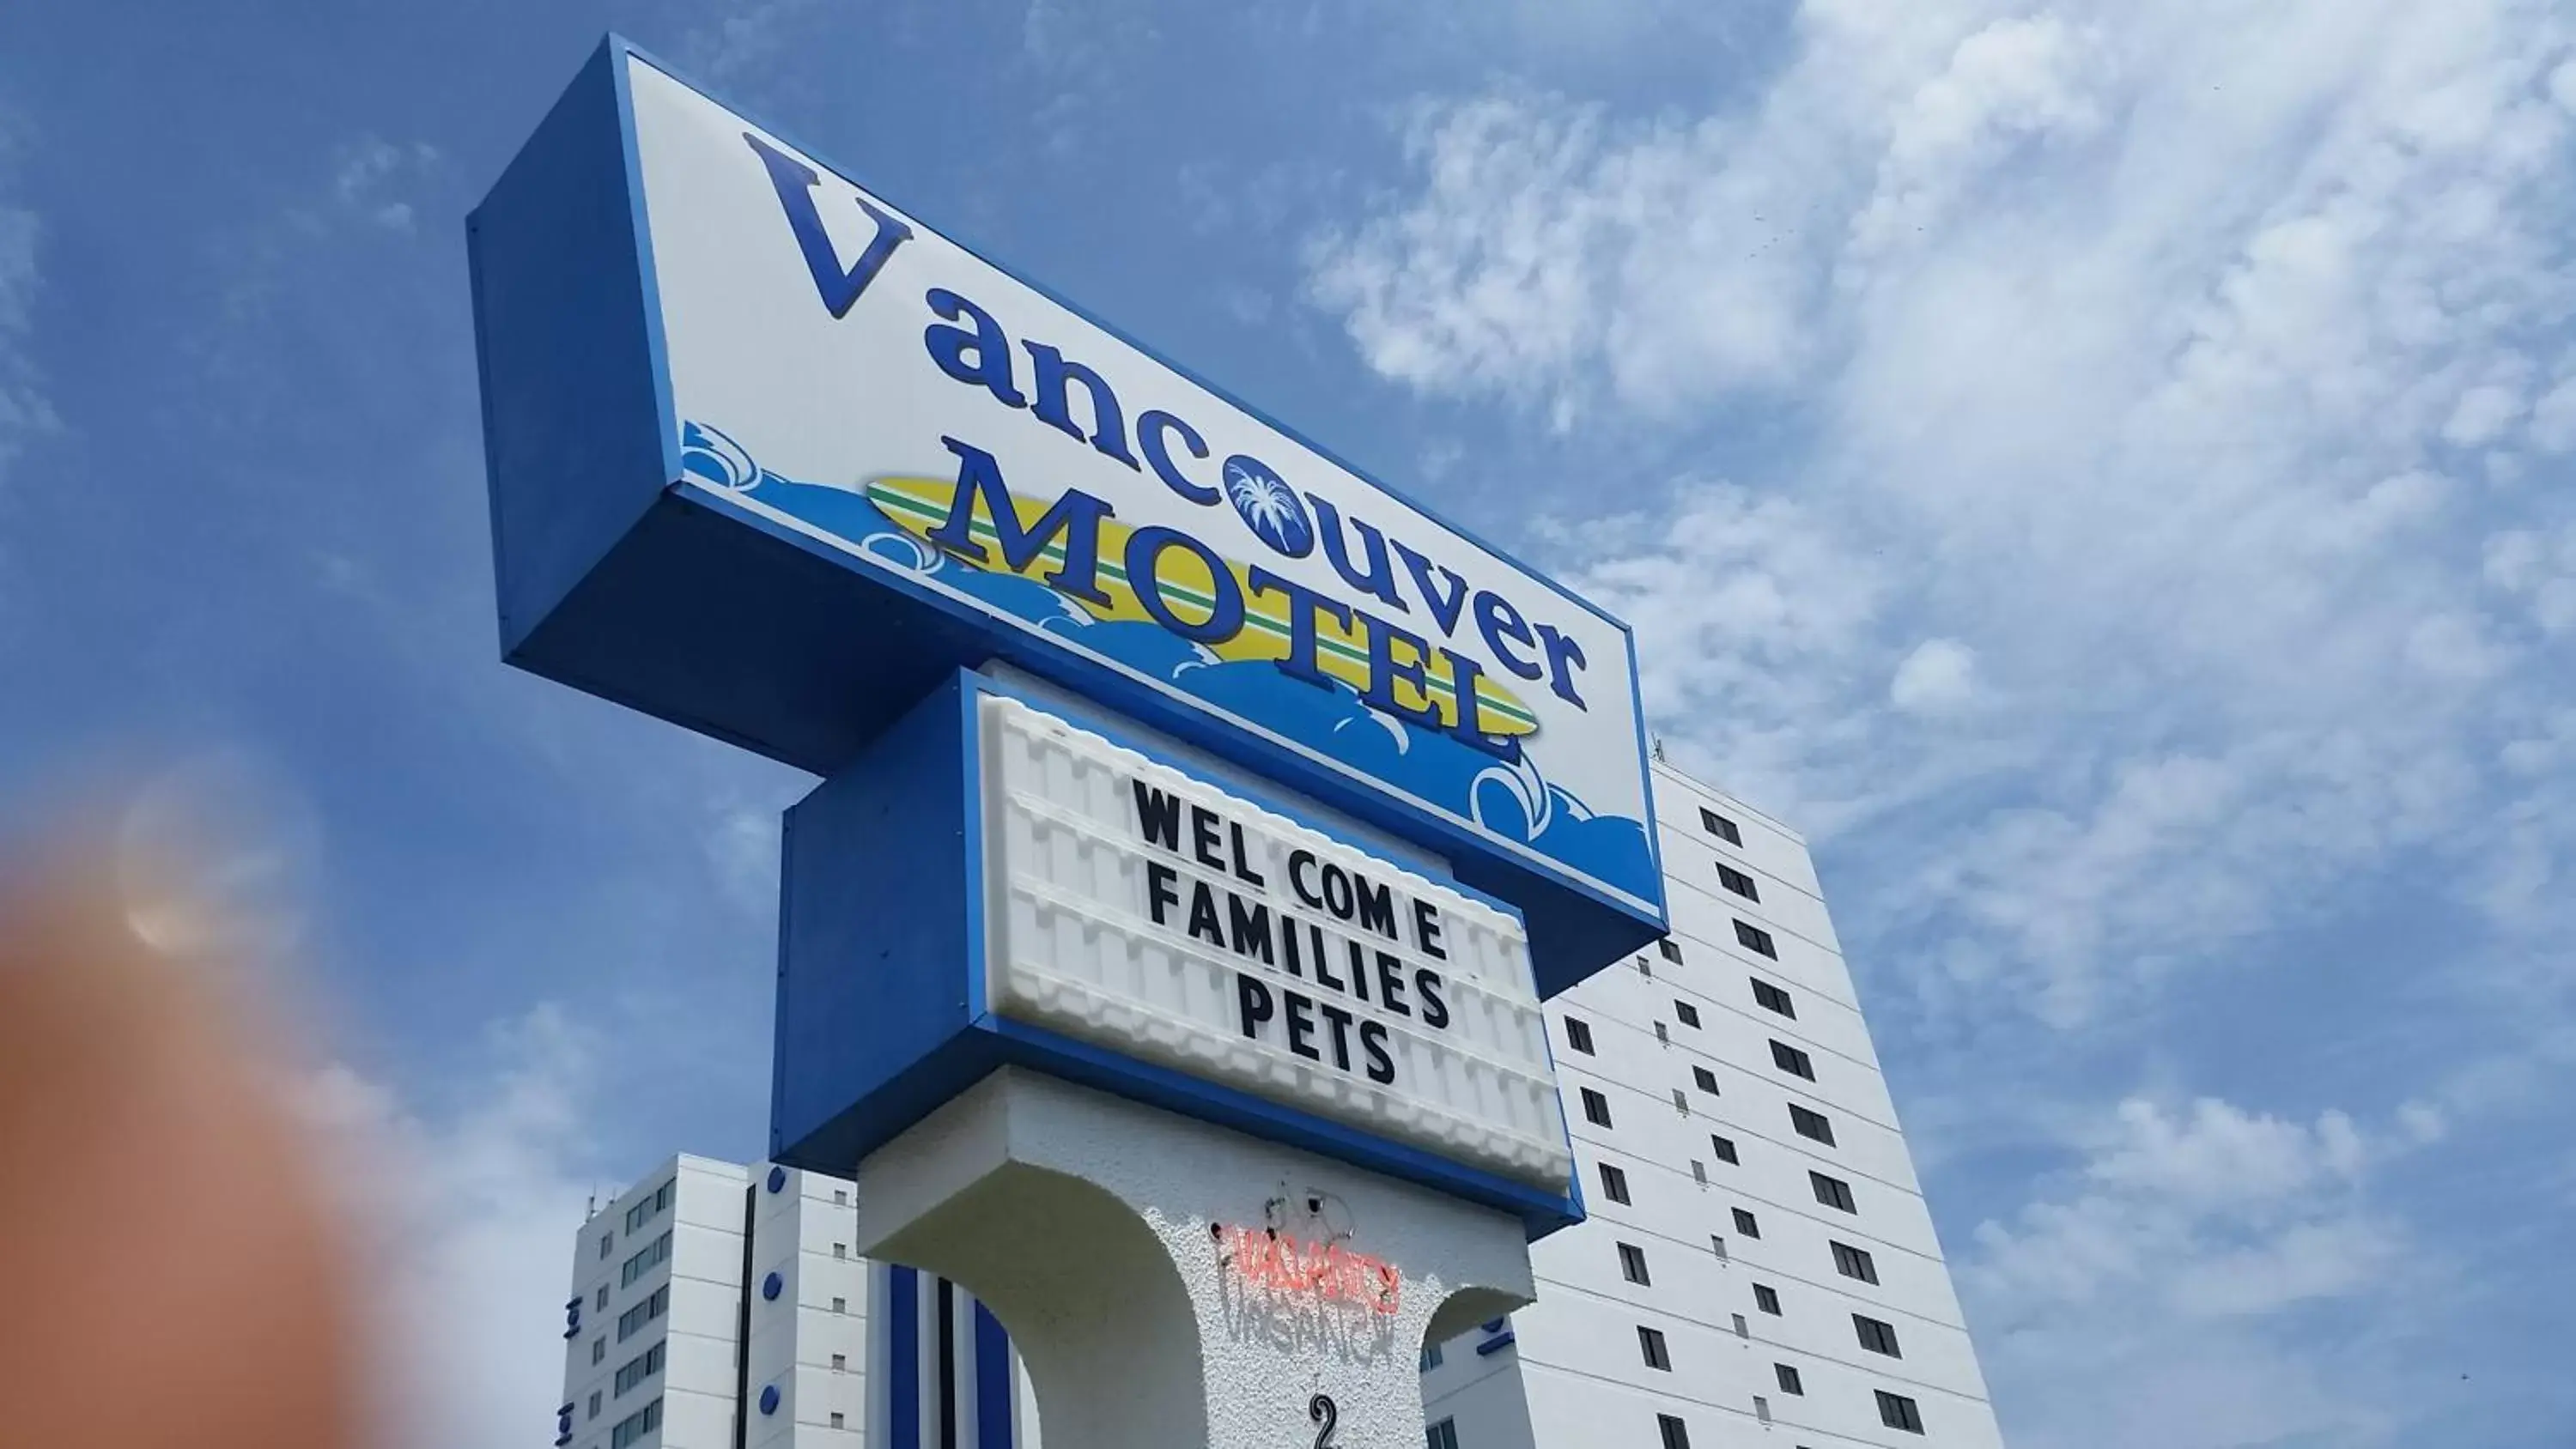 Property logo or sign, Property Building in Vancouver Motel